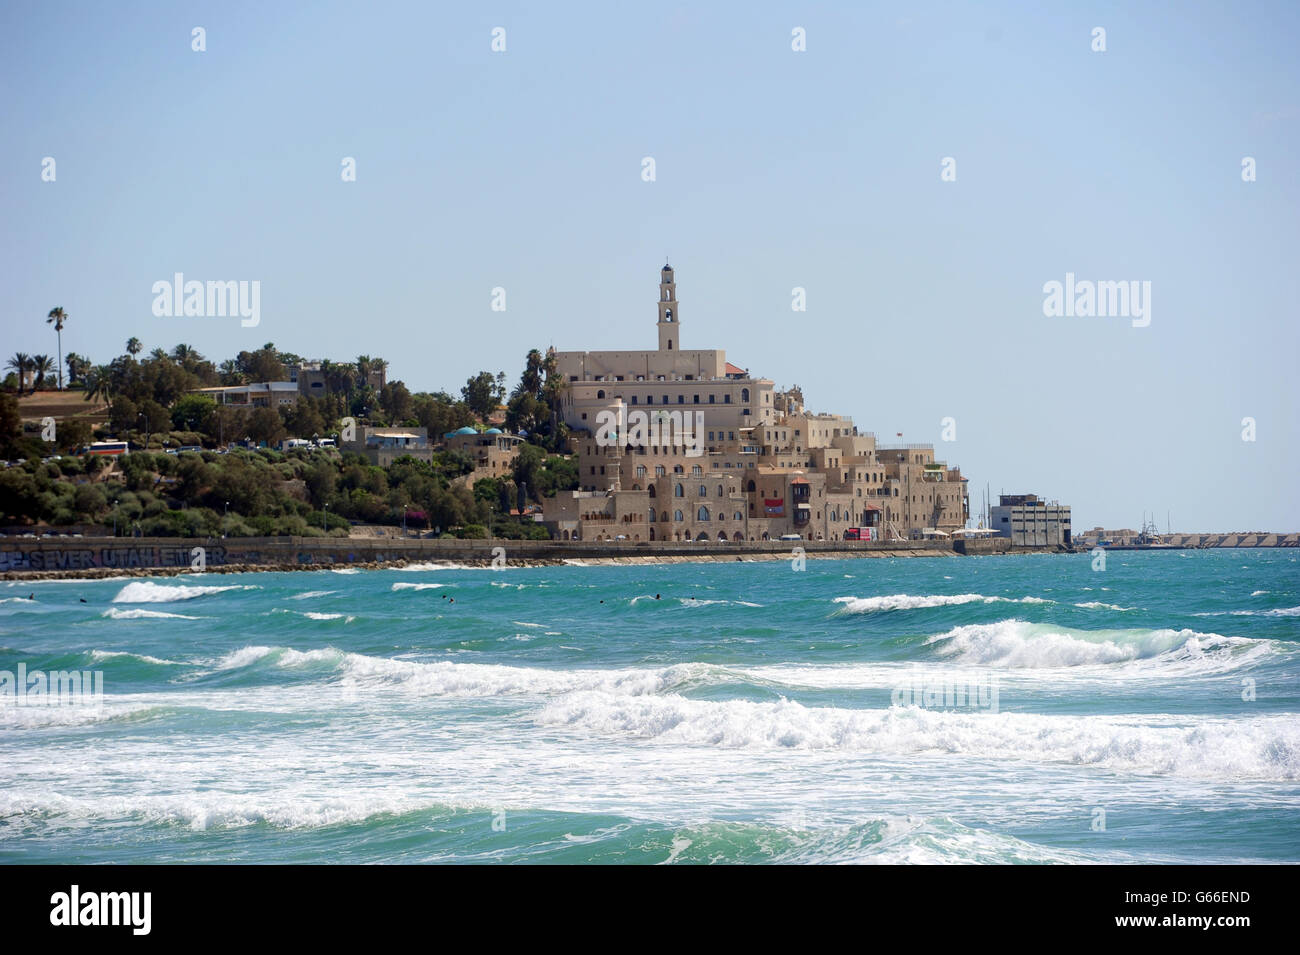 The ancient city of Jaffa as seen from Tel Aviv Stock Photo